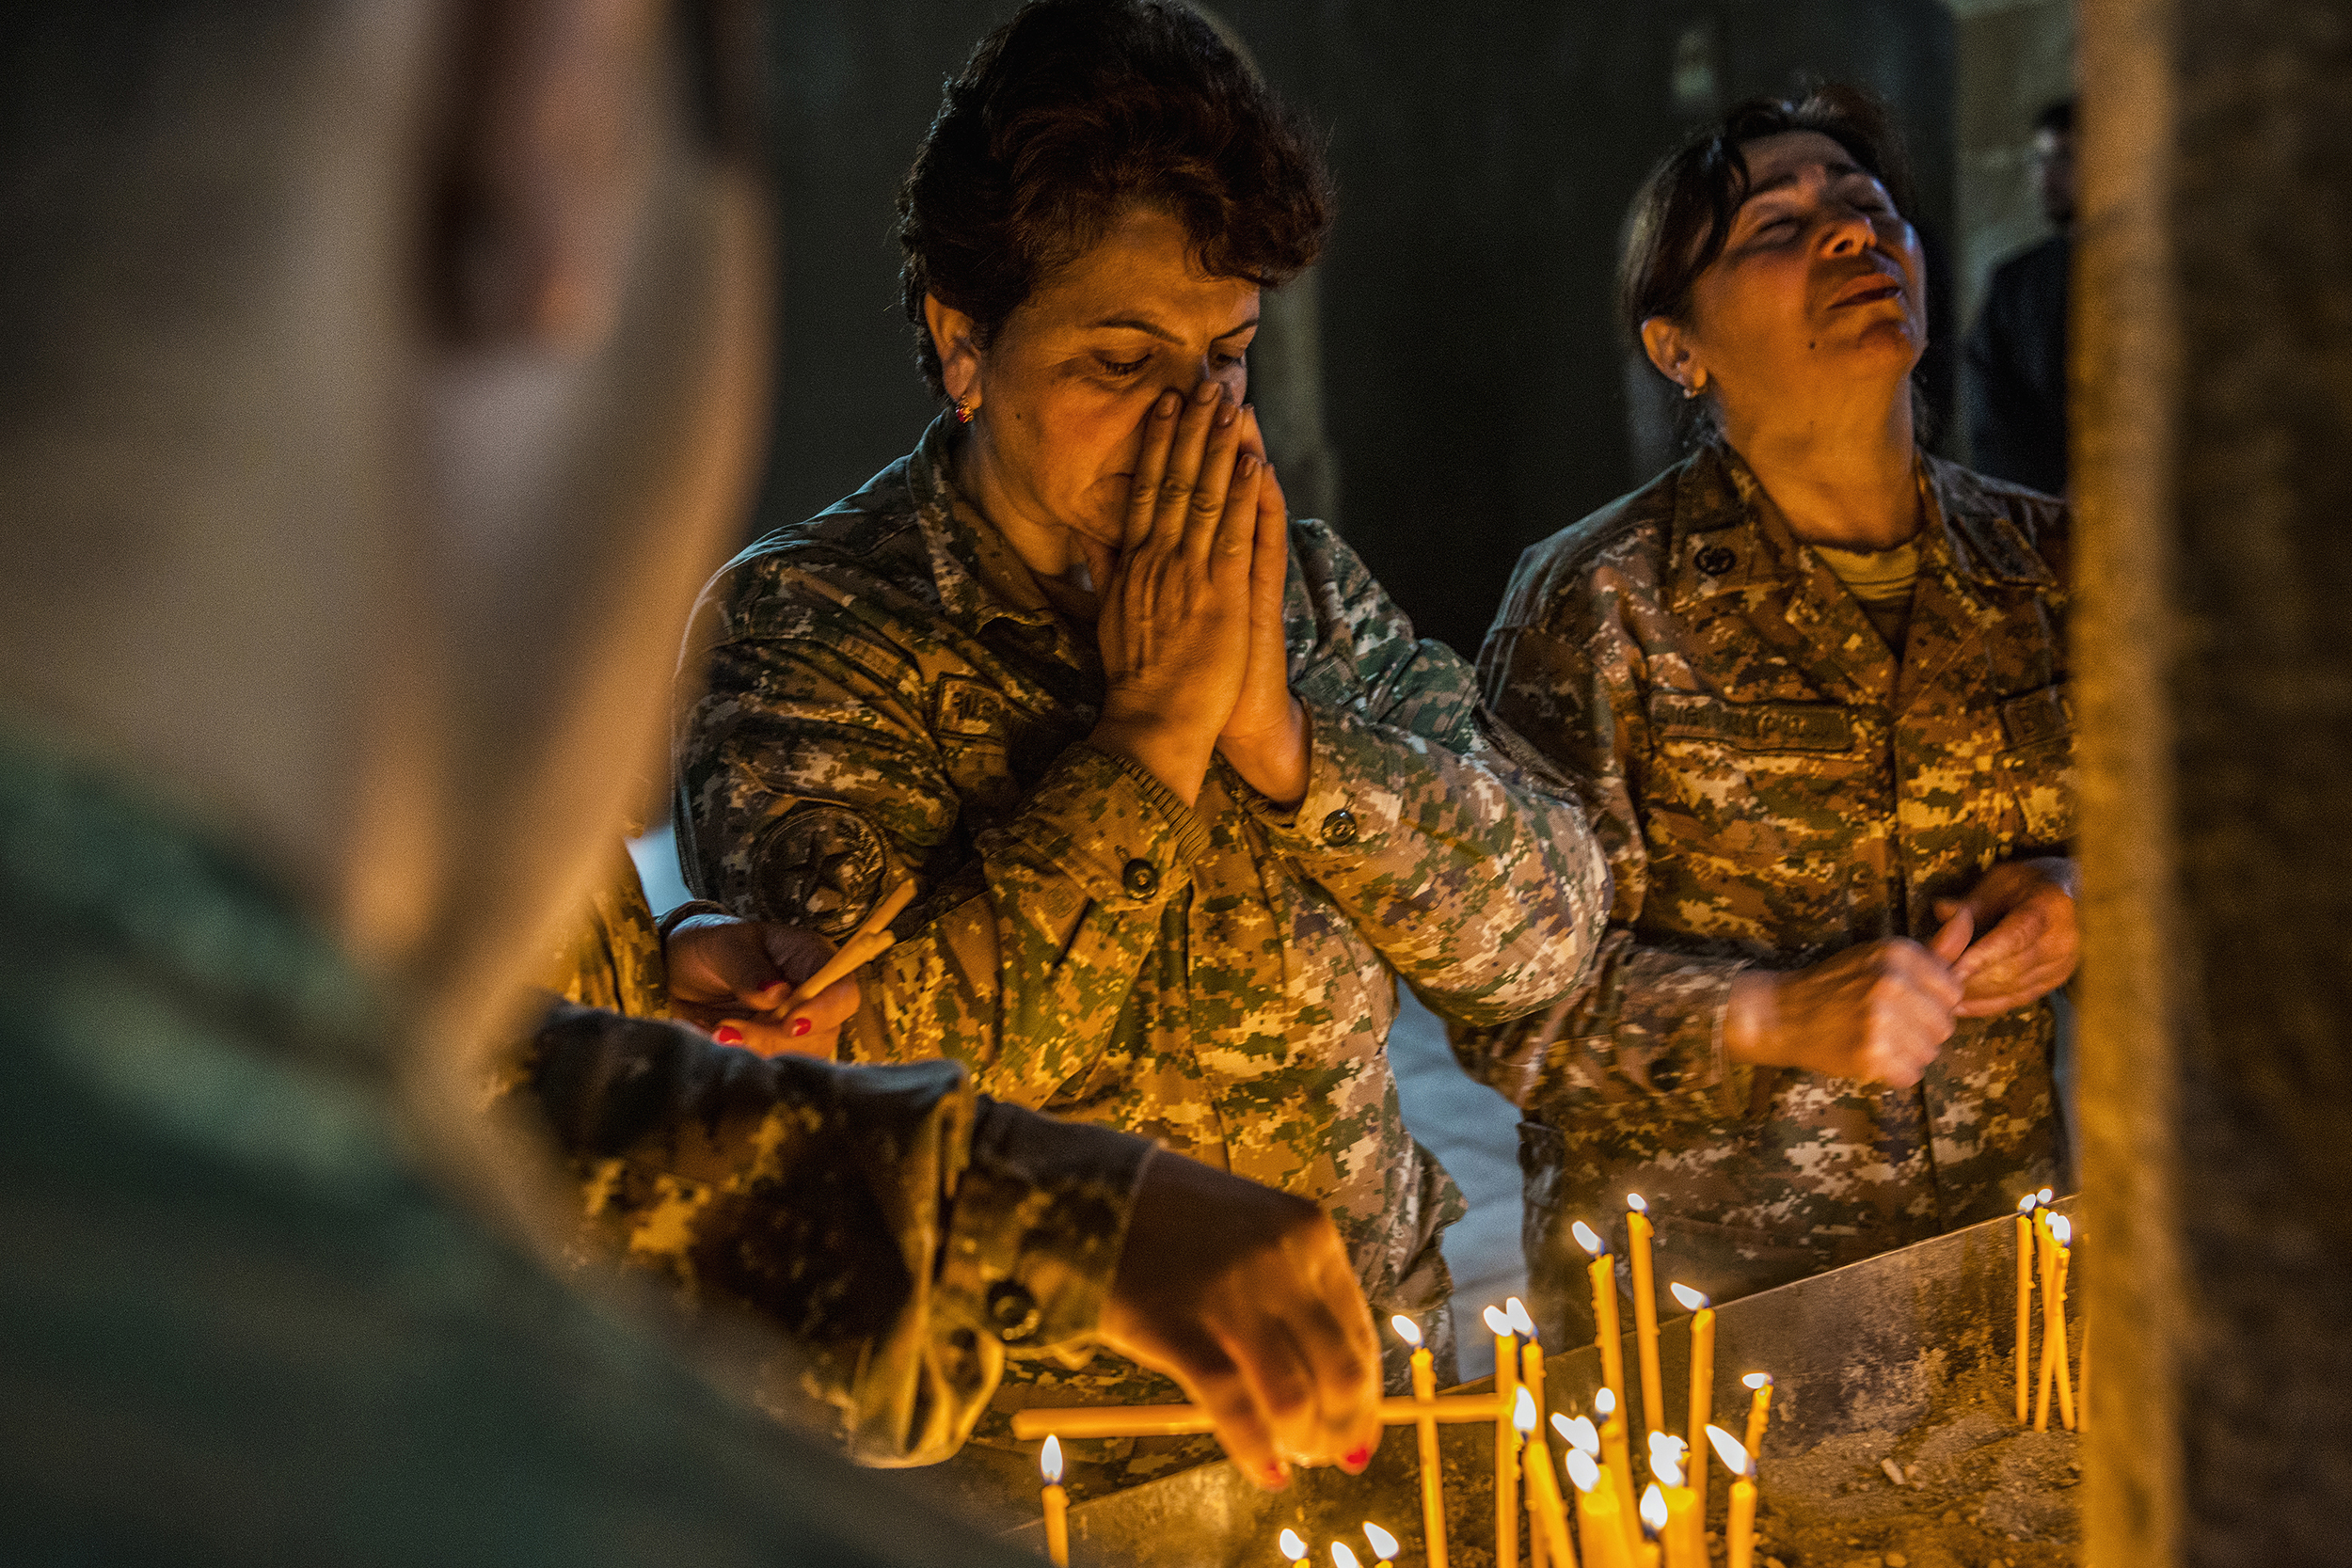  NKR Defense Army soldiers pray in the Church of Mother Mary in Talish, Nagorno-Karabakh a month after the Four-Day War ended.  When the Soviet Union dissolved in 1991, long-held tensions between Armenia and Azerbaijan snapped into the Nagorno-Karaba